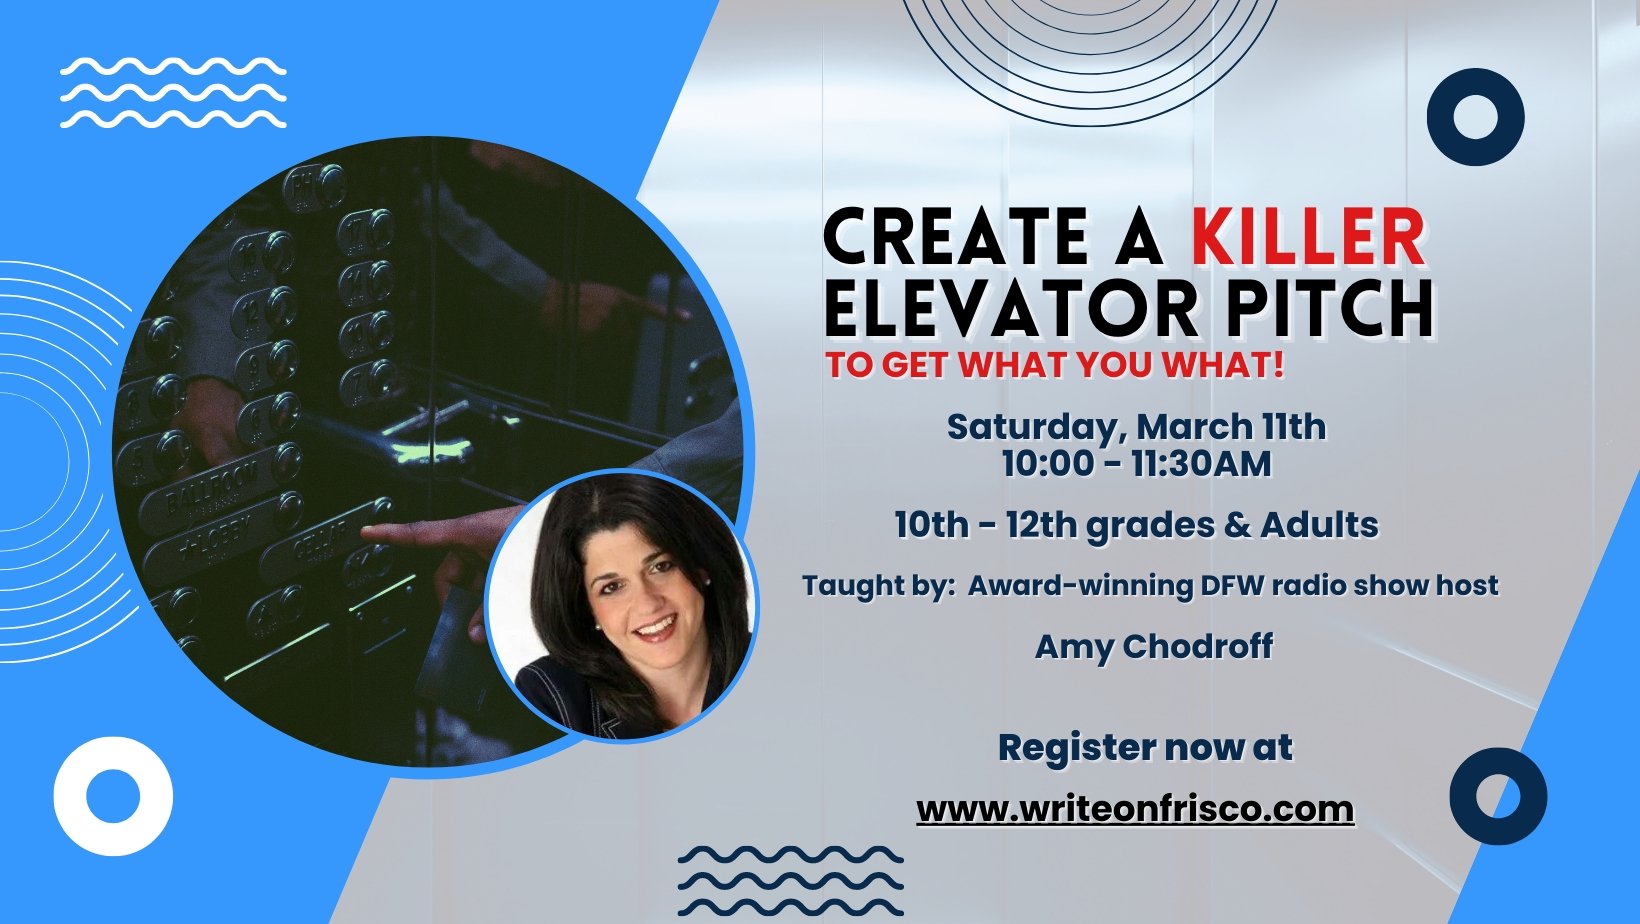 Create a Killer Elevator Pitch to Get What You Want! - Write On! Creative Writing Center